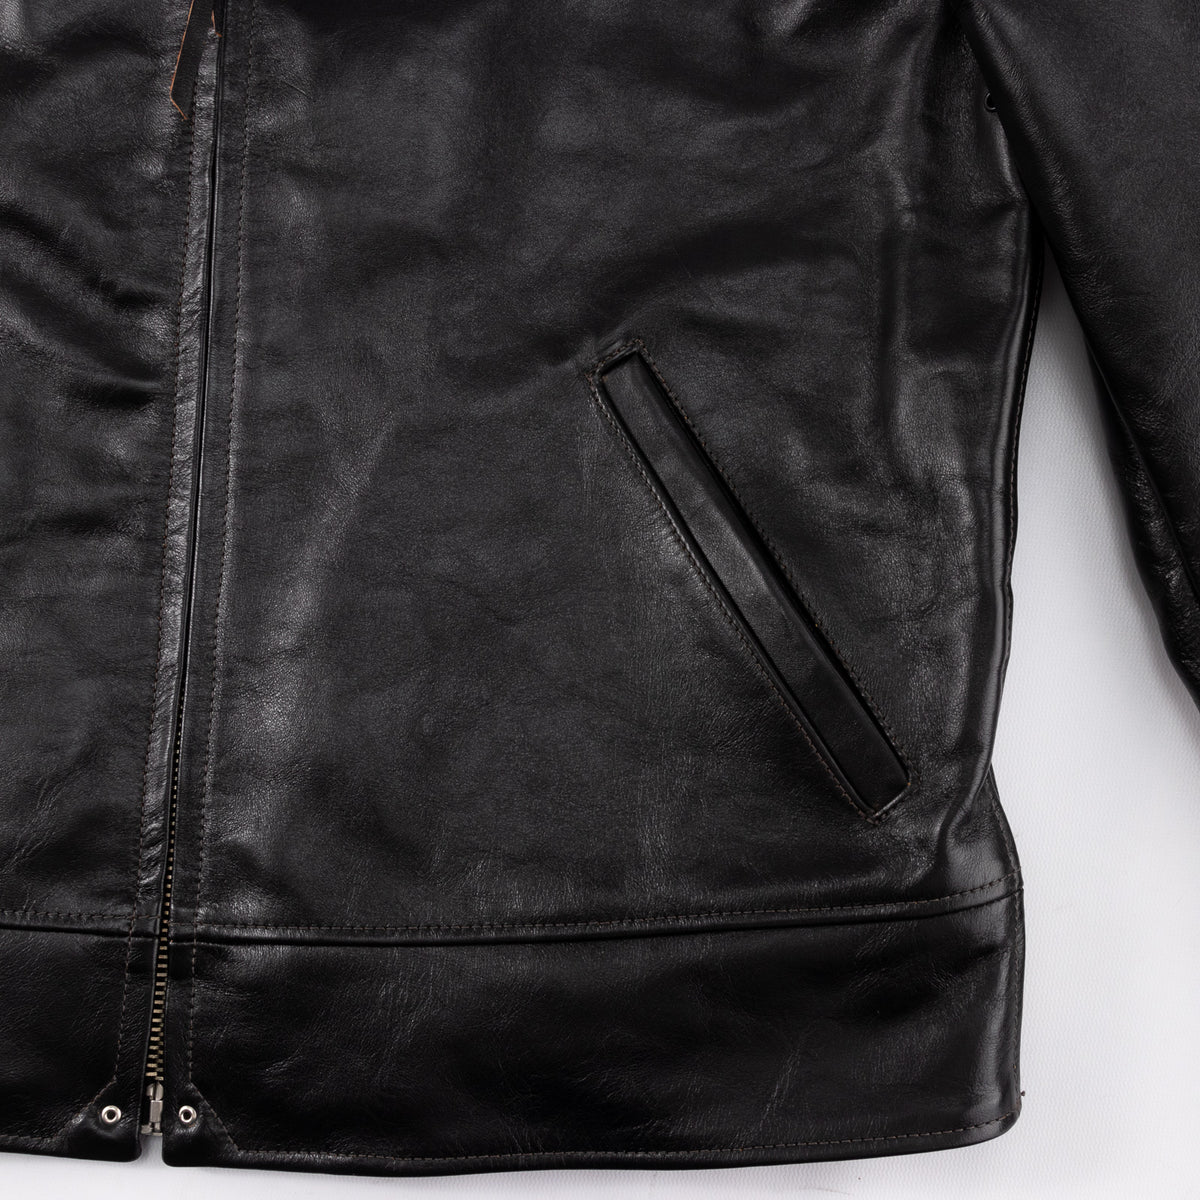 The Real McCoy's Nelson 30s Sports Jacket - Black Horsehide - Standard ...